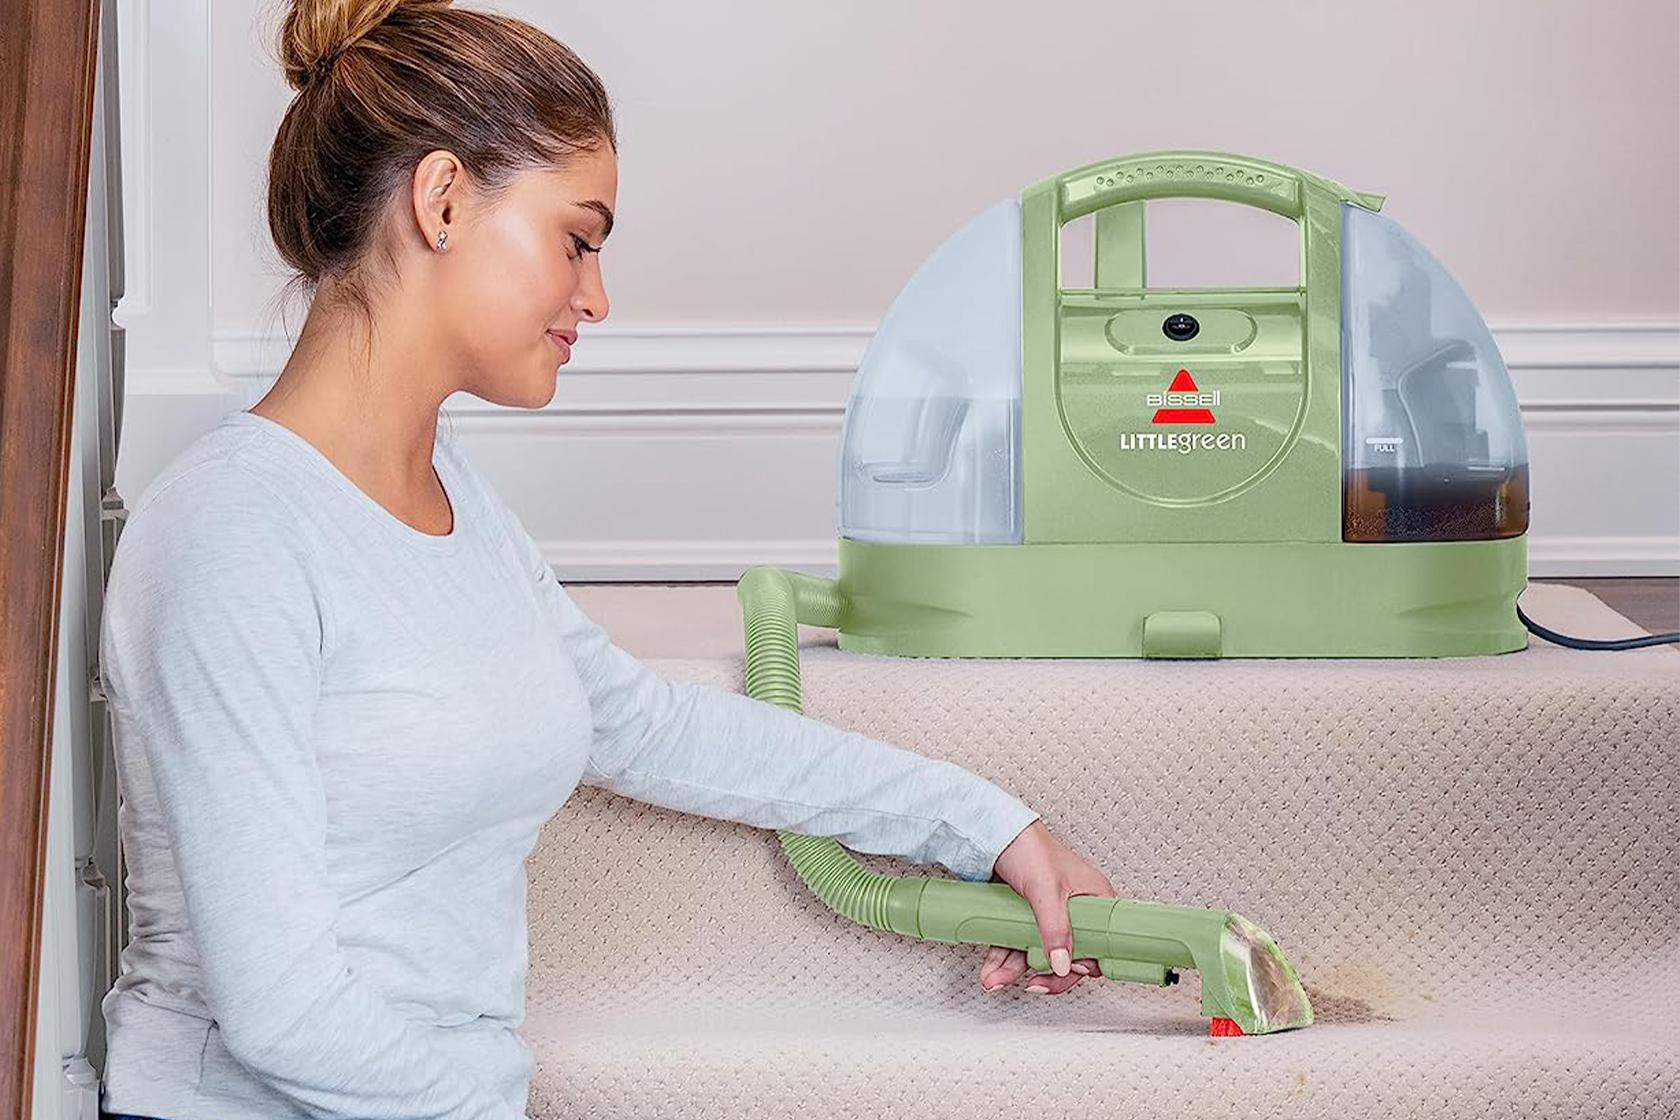 Bissell's Little Green Carpet Cleaner Is 30% Off on Prime Day